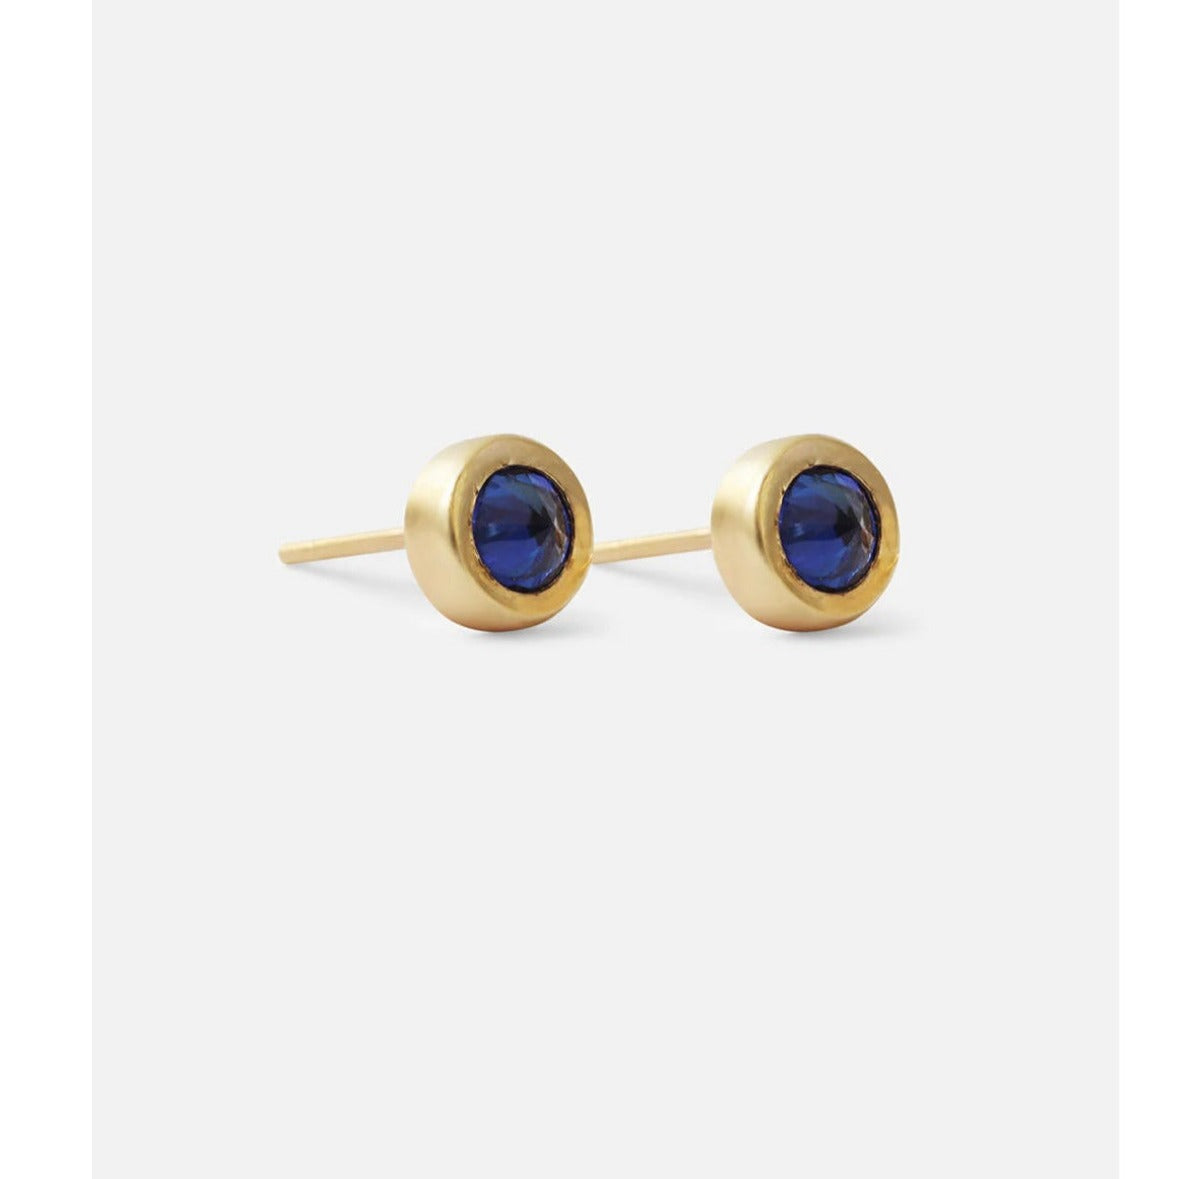  SAPPHIRE POINTY/STUDS, a timeless and elegant accessory that effortlessly elevates any outfit. These versatile earrings are perfect for any occasion.3.5mm Blue Sapphires 6.15mm studs 14k Yellow Gold